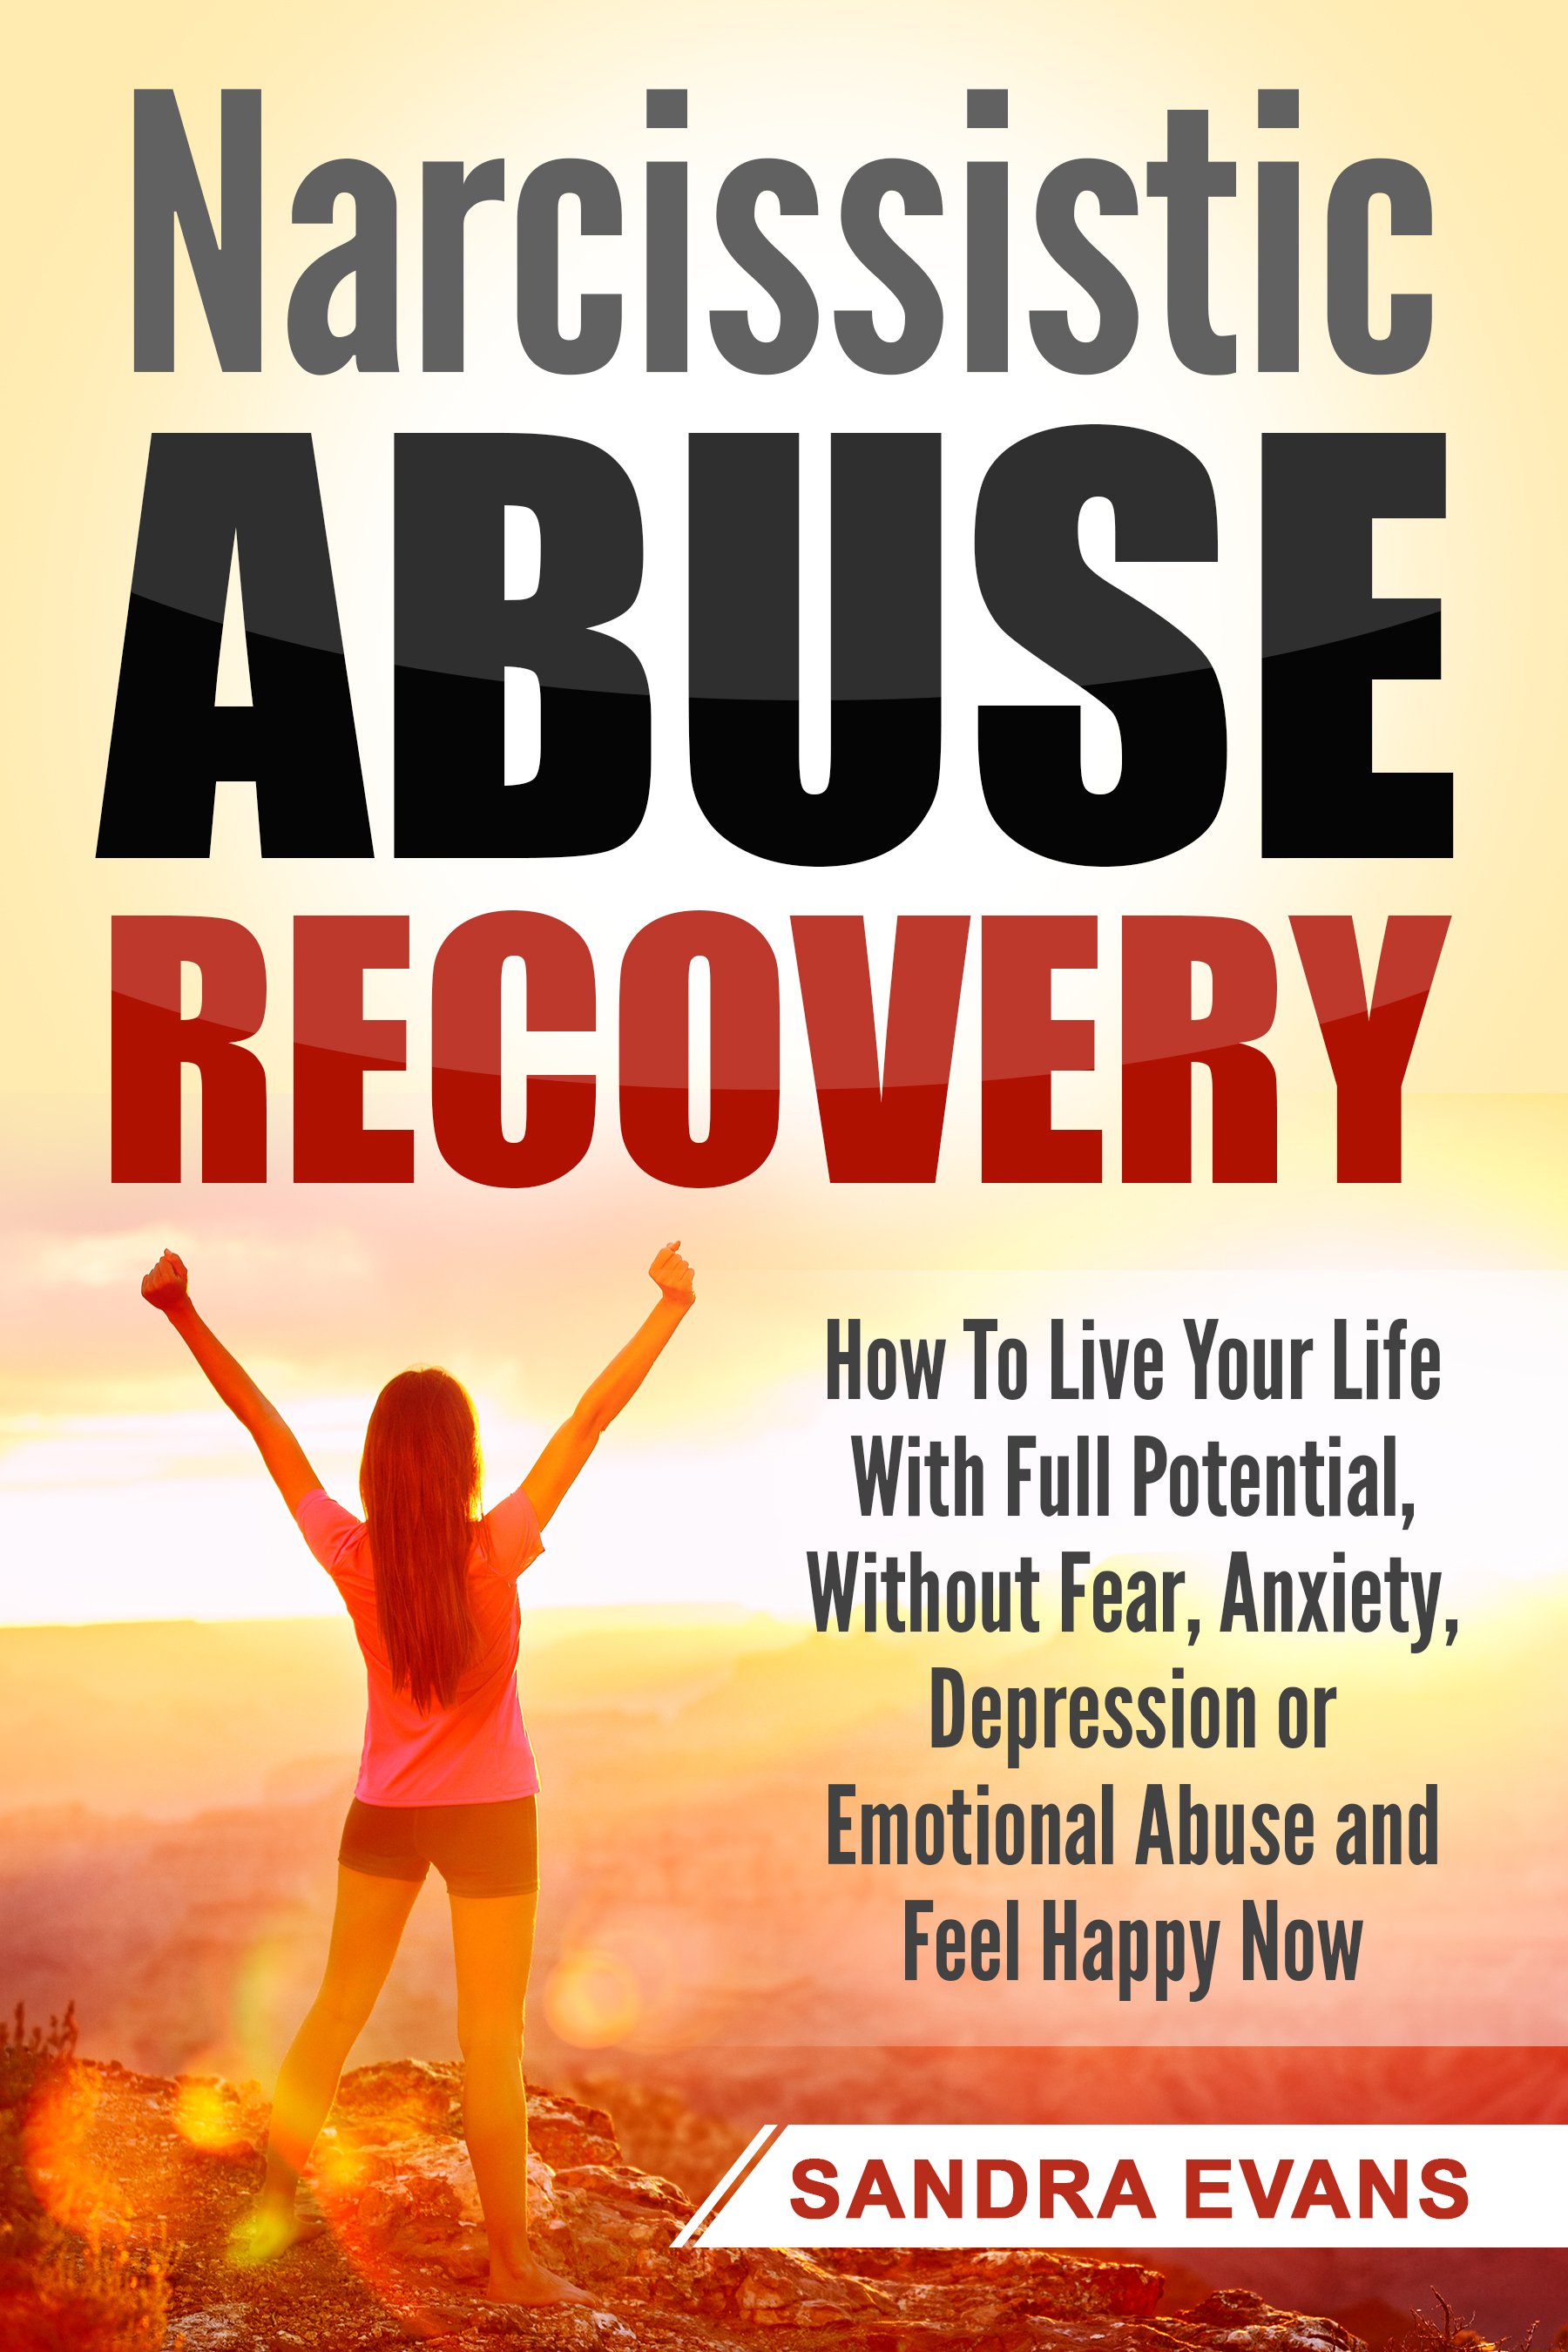 FREE: Narcissistic Abuse Recovery: How to Live Your Life with Full Potential, Without Fear, Anxiety, Depression or Emotional Abuse and Feel Happy Now by Sandra Evans